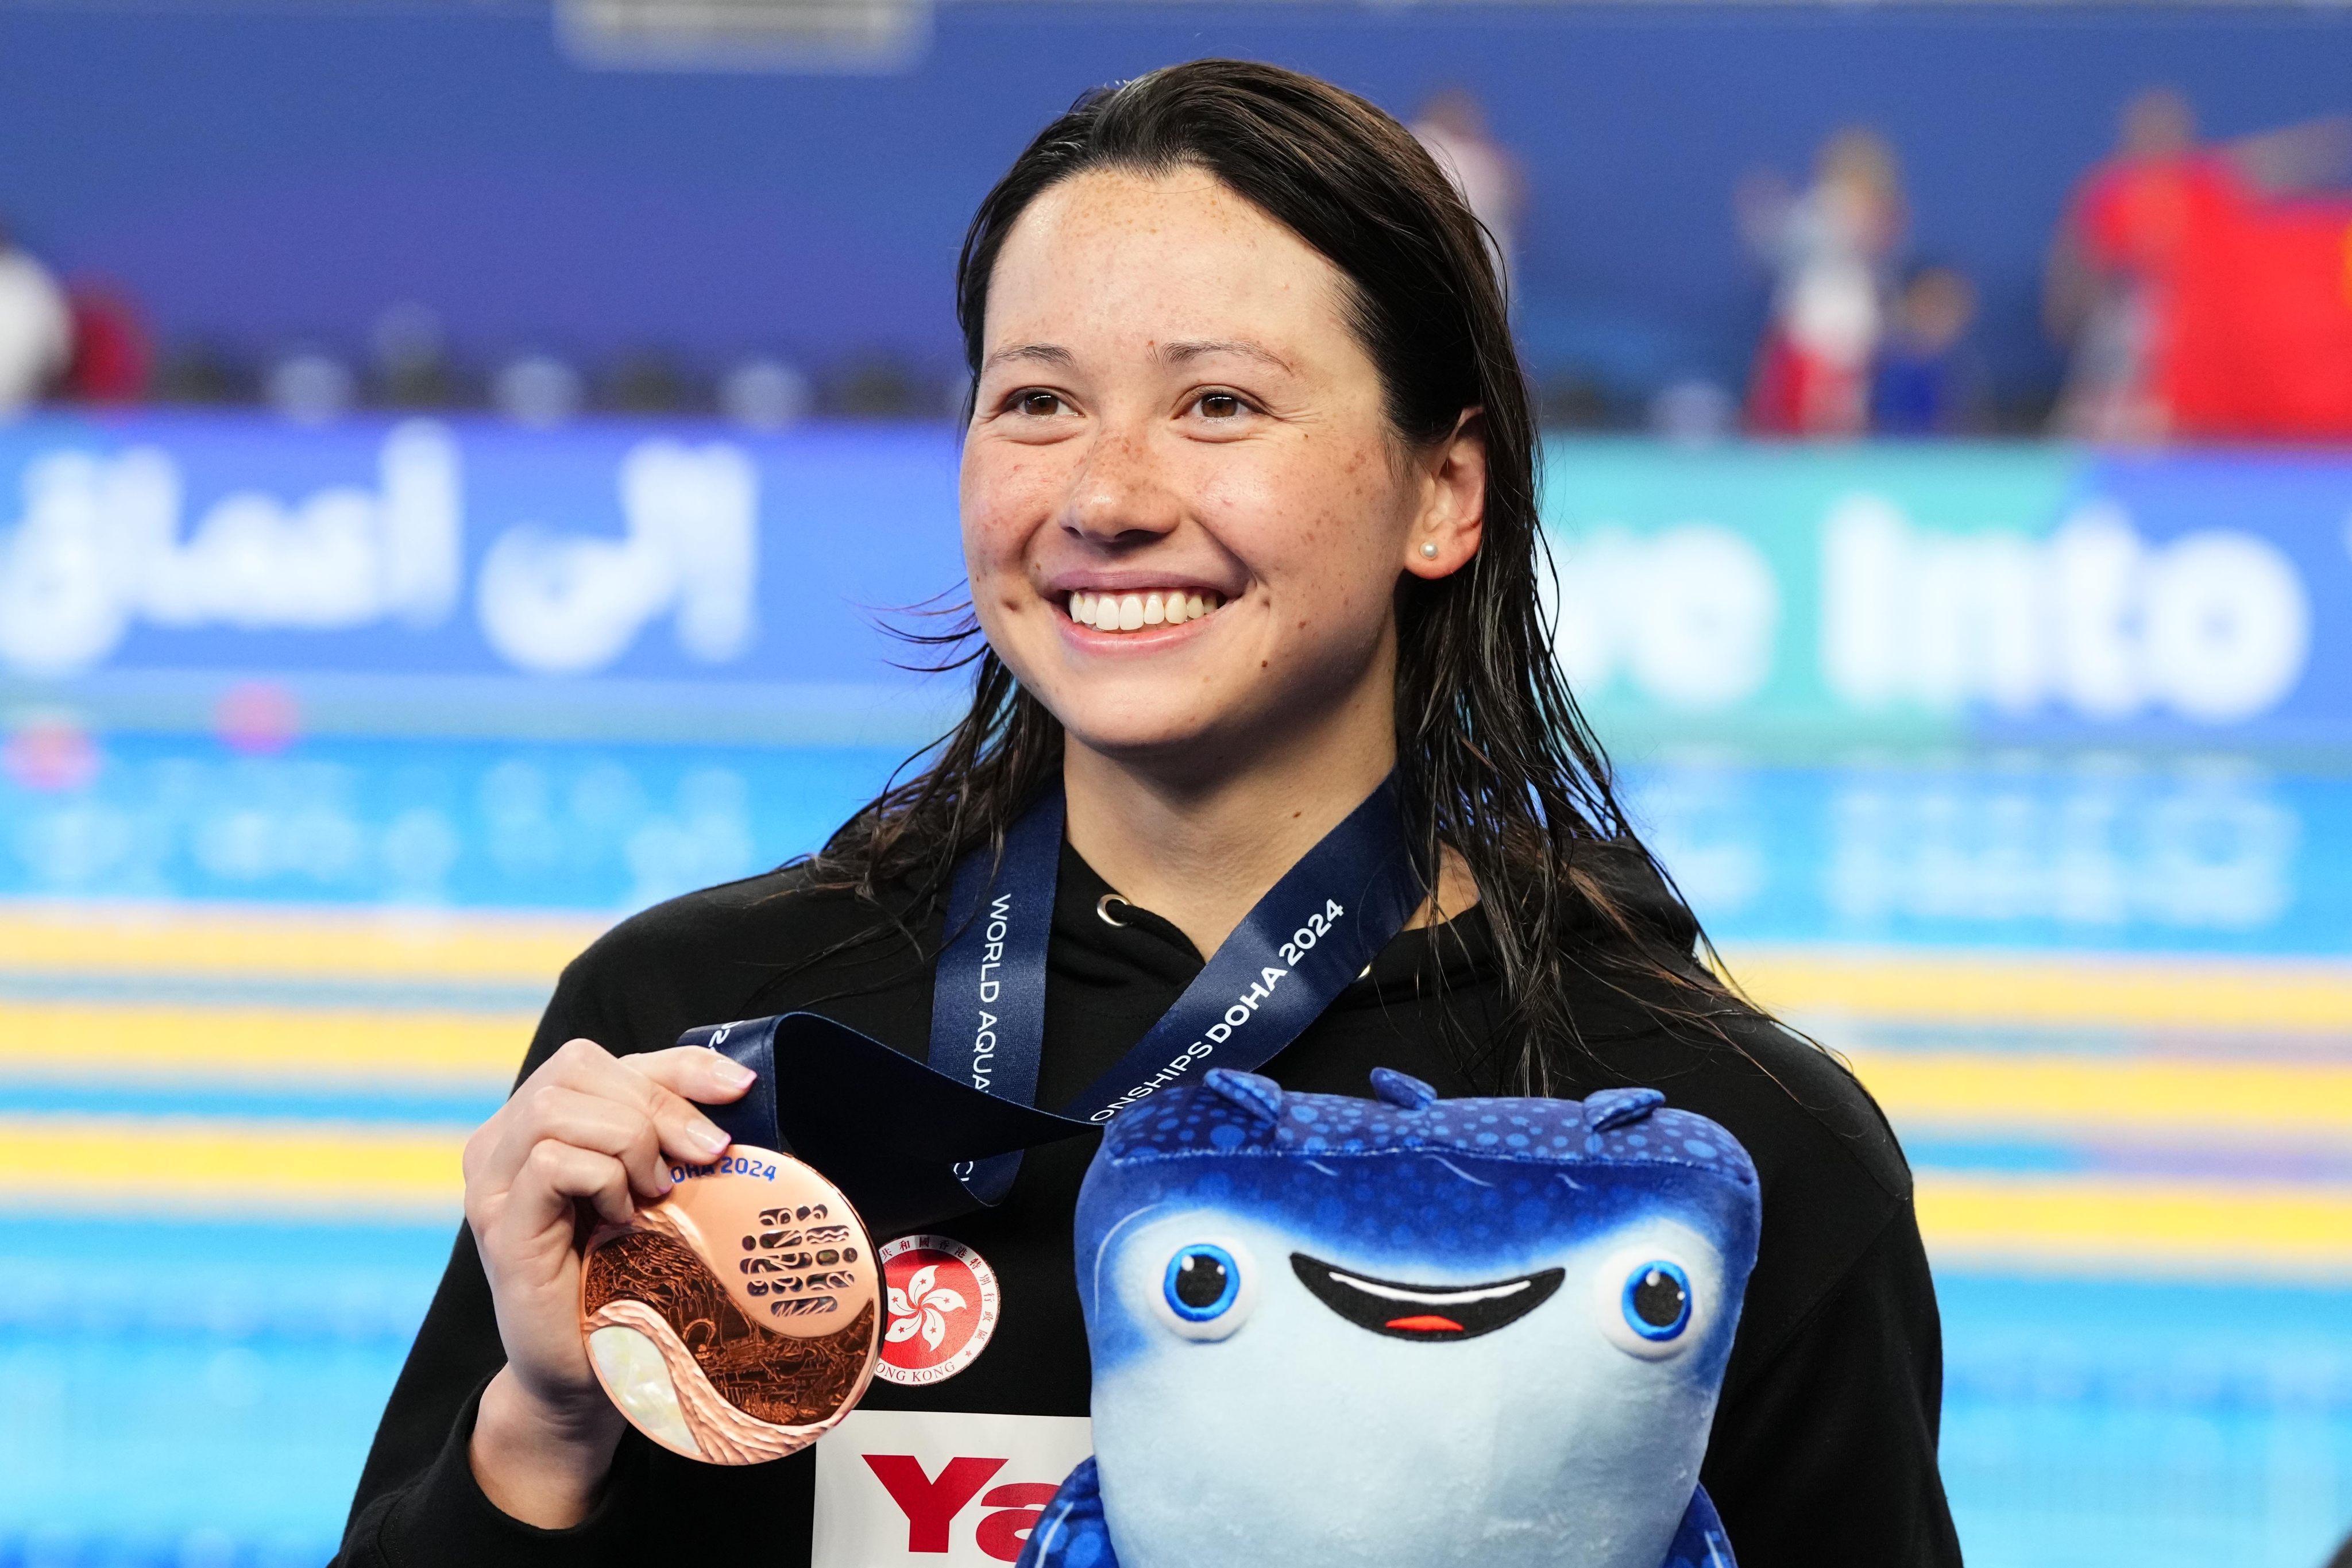 Siobhan Haughey displays her bronze medal after the 100m breaststroke final in Qatar. Photo: AP